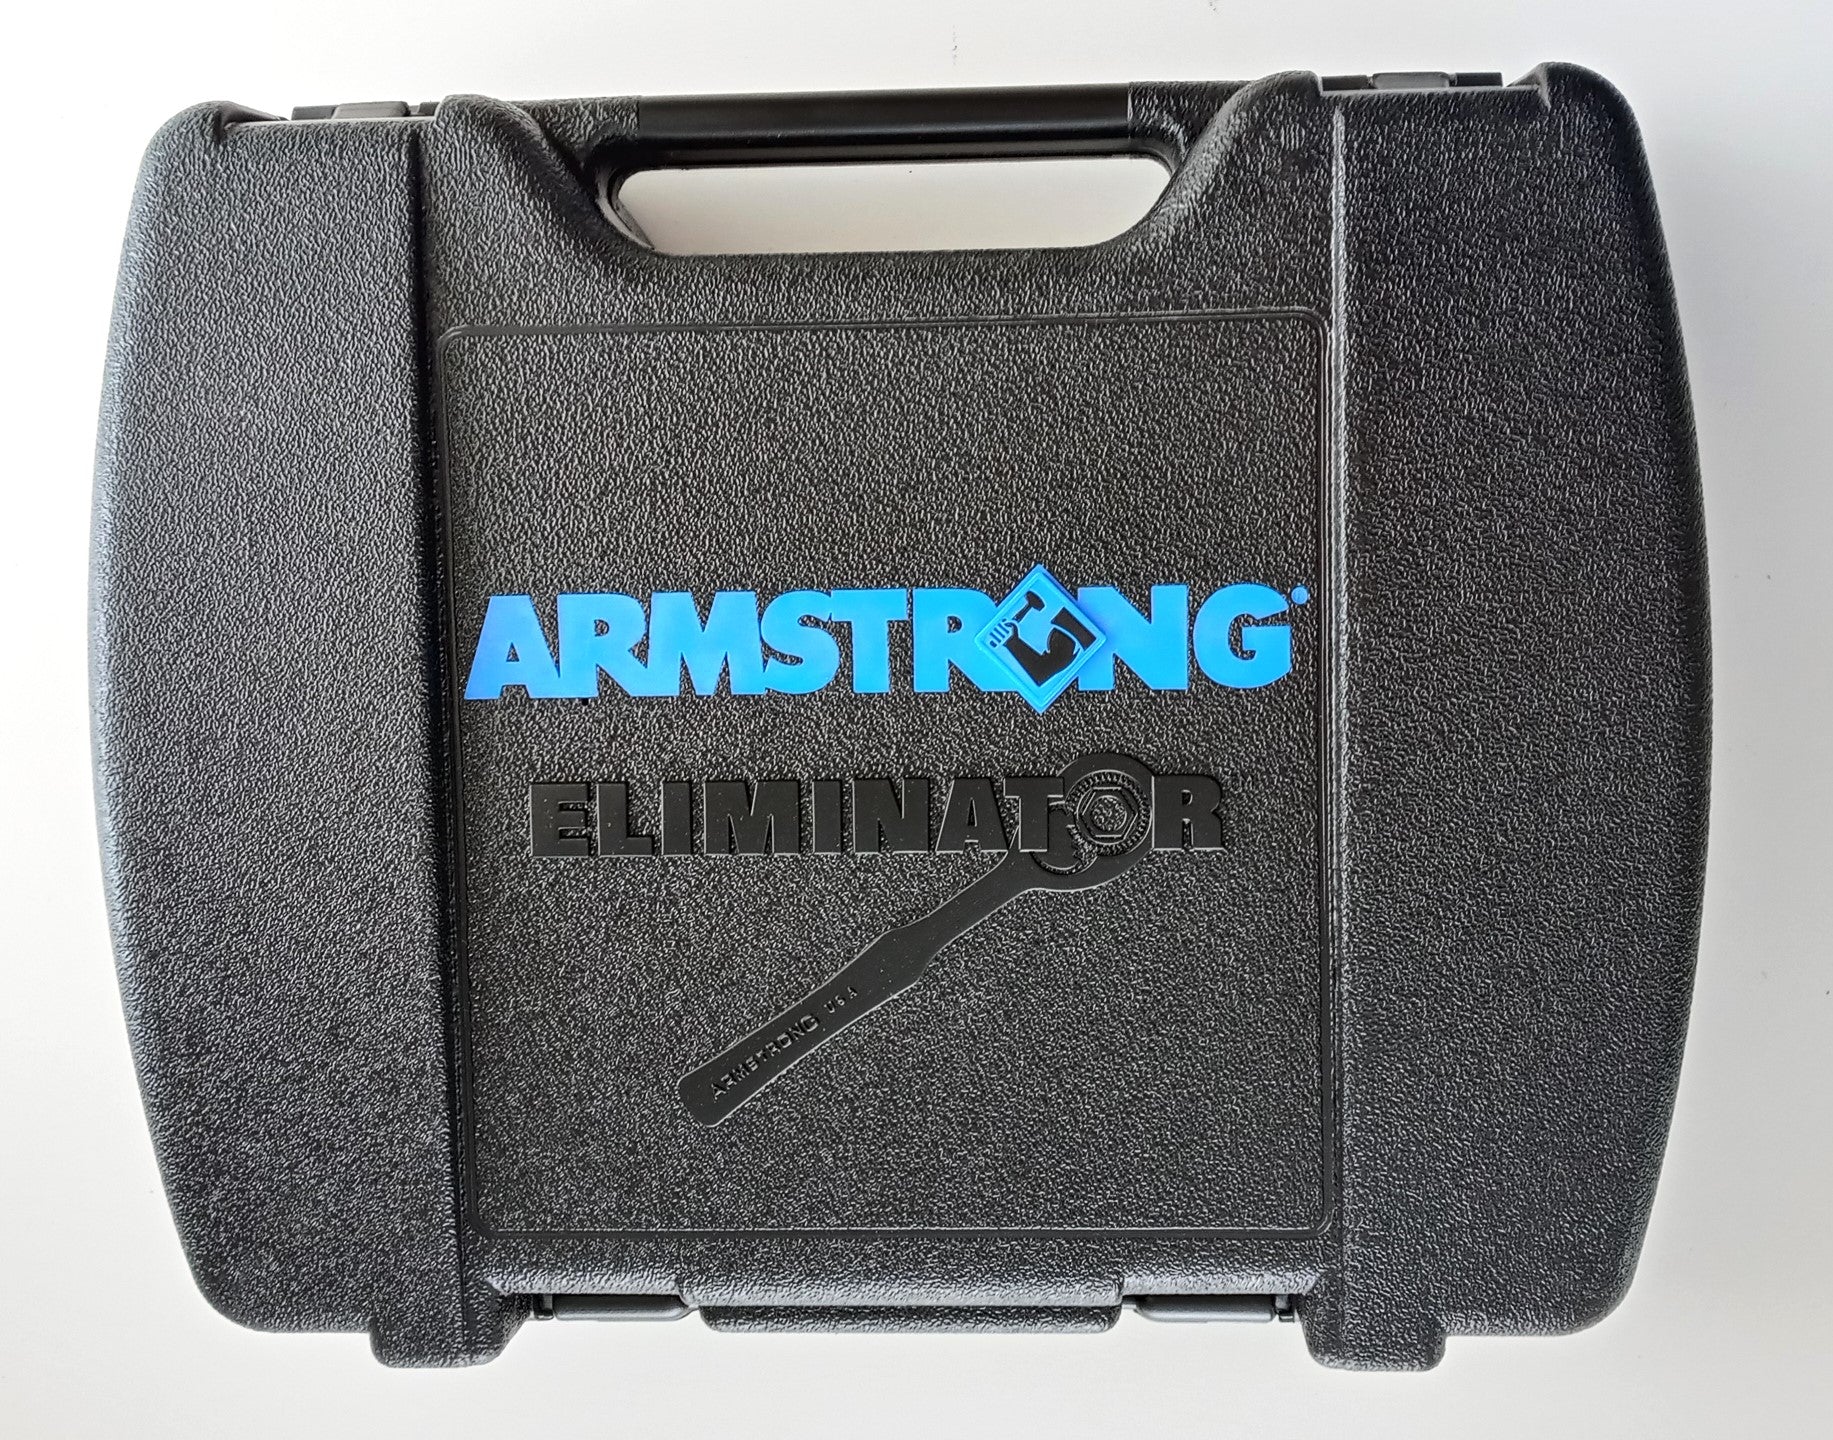 Armstrong 16-624 1/2" Drive Eliminator Blow Mold Case (Case Only) 5MH46 USA